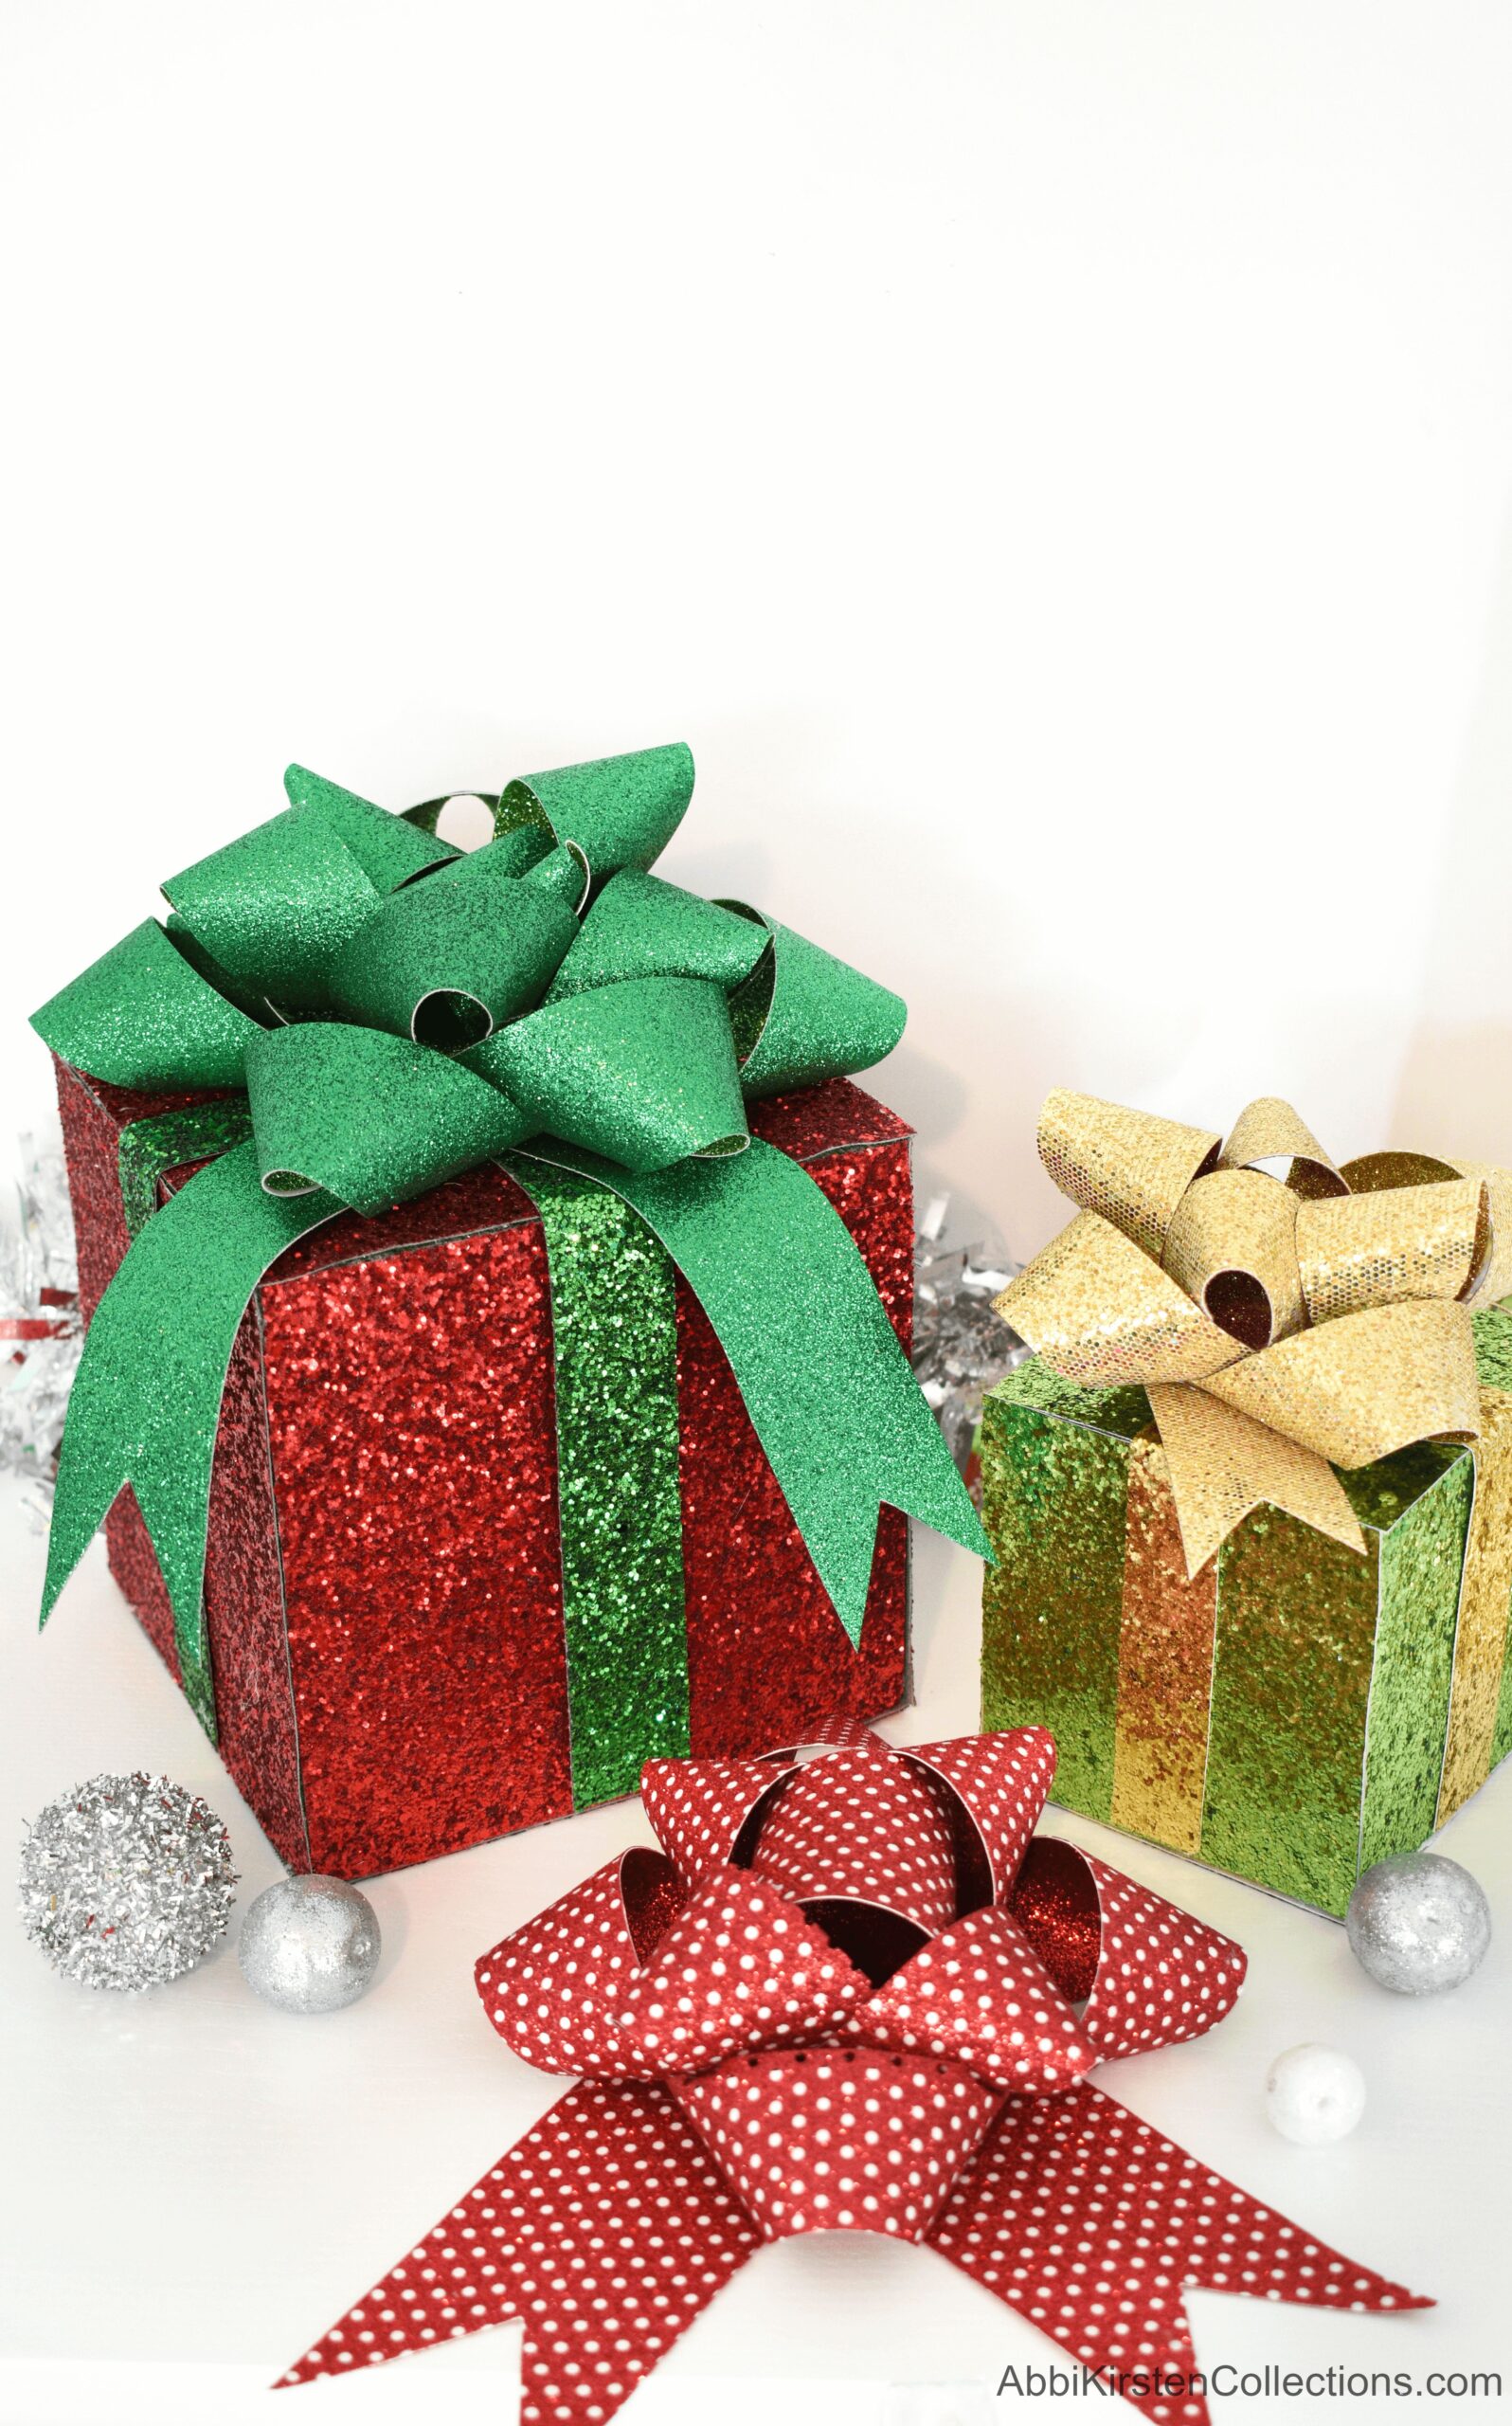 Two decorative gift boxes made with faux glitter leather sheets. One box is red with a green bow, and a smaller box is light green with a gold bow. A red and white polka dot bow sits between the gift boxes.